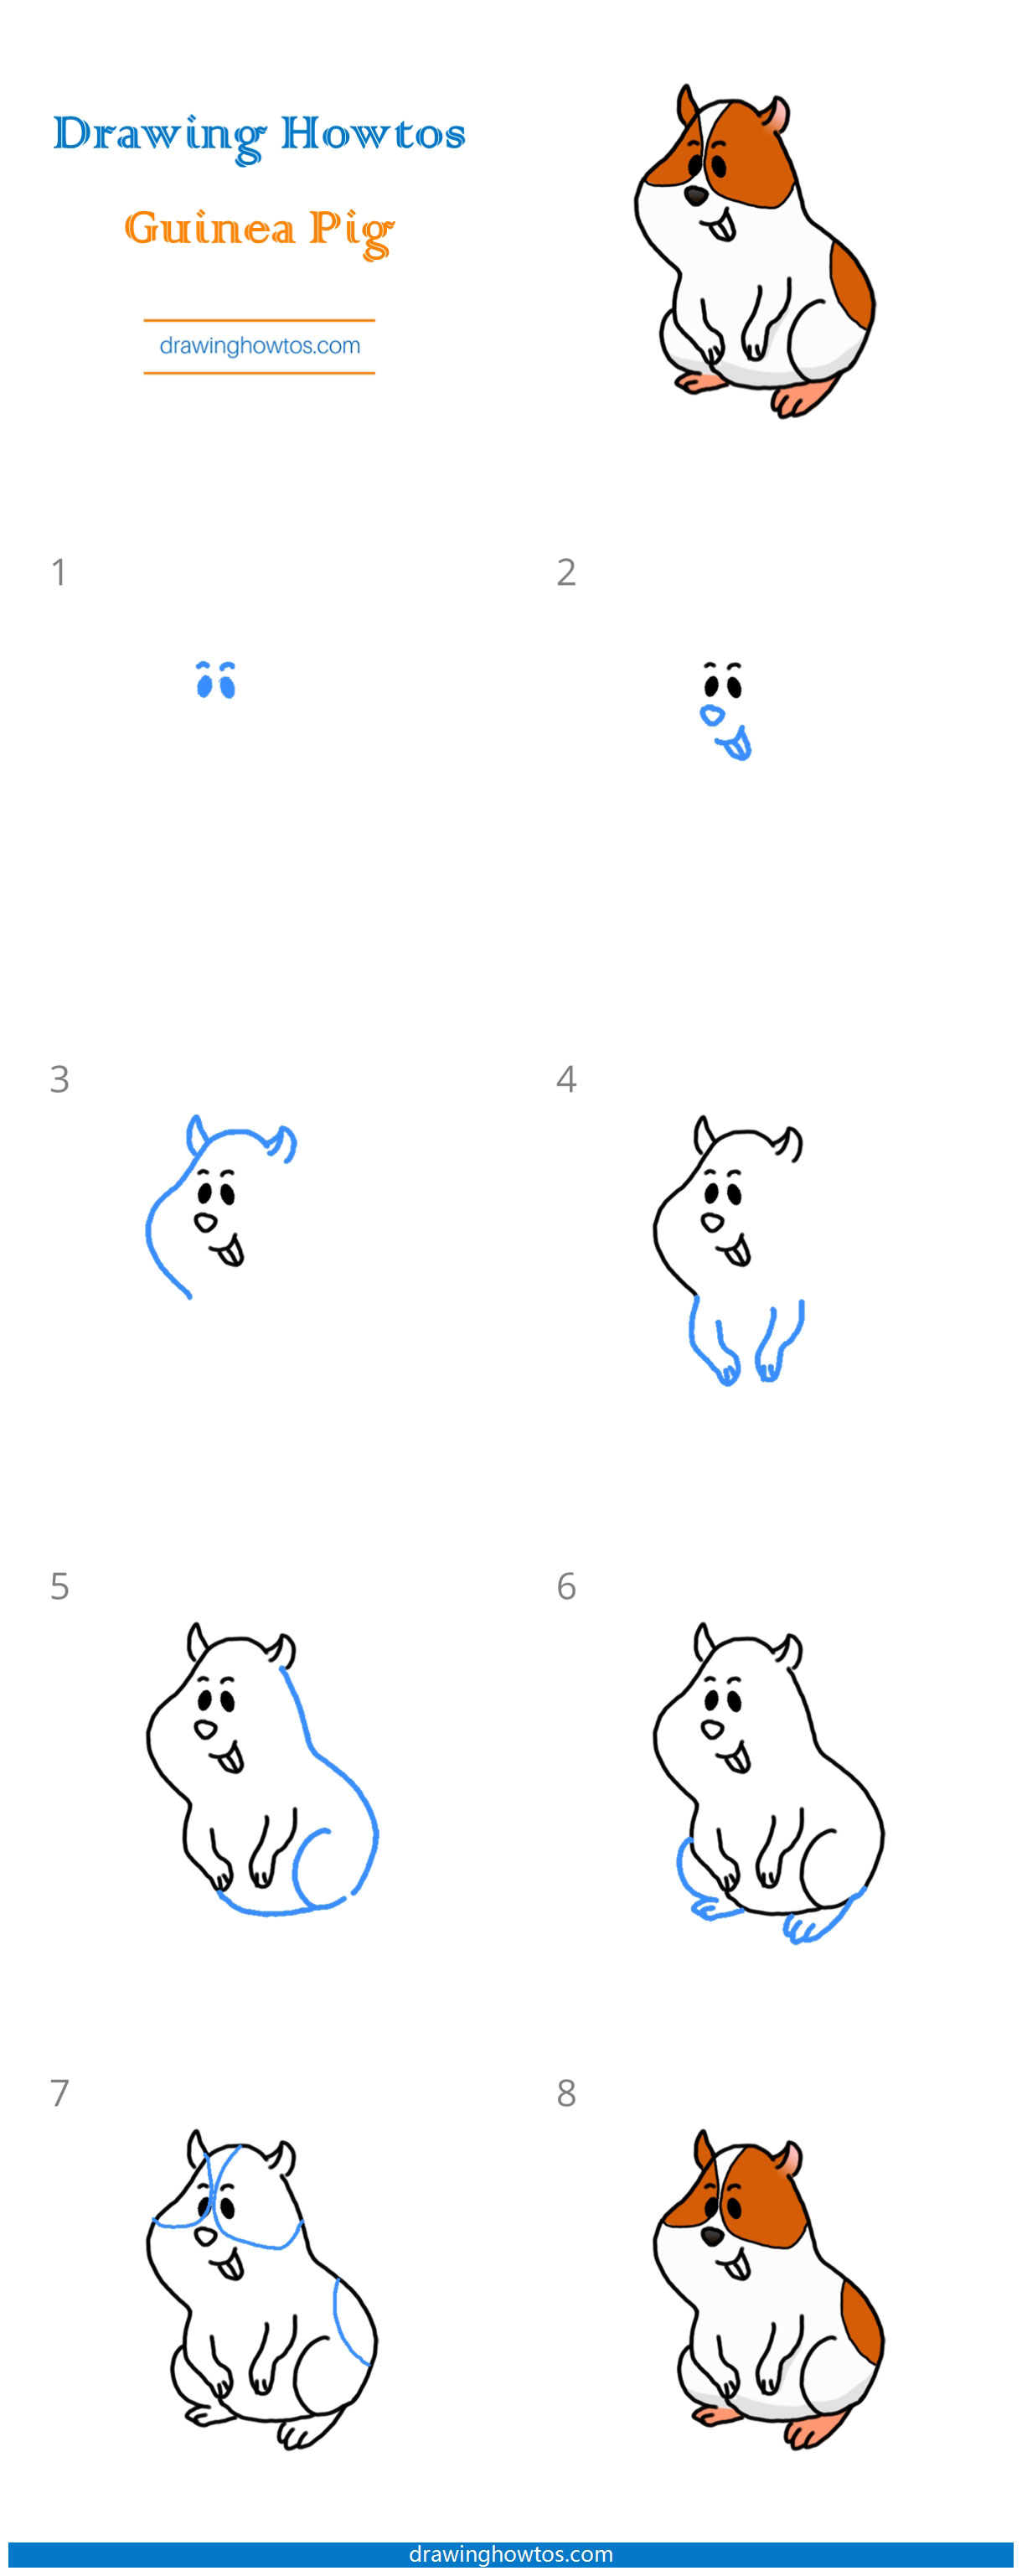 How to Draw a Guinea Pig - Step by Step Easy Drawing Guides - Drawing